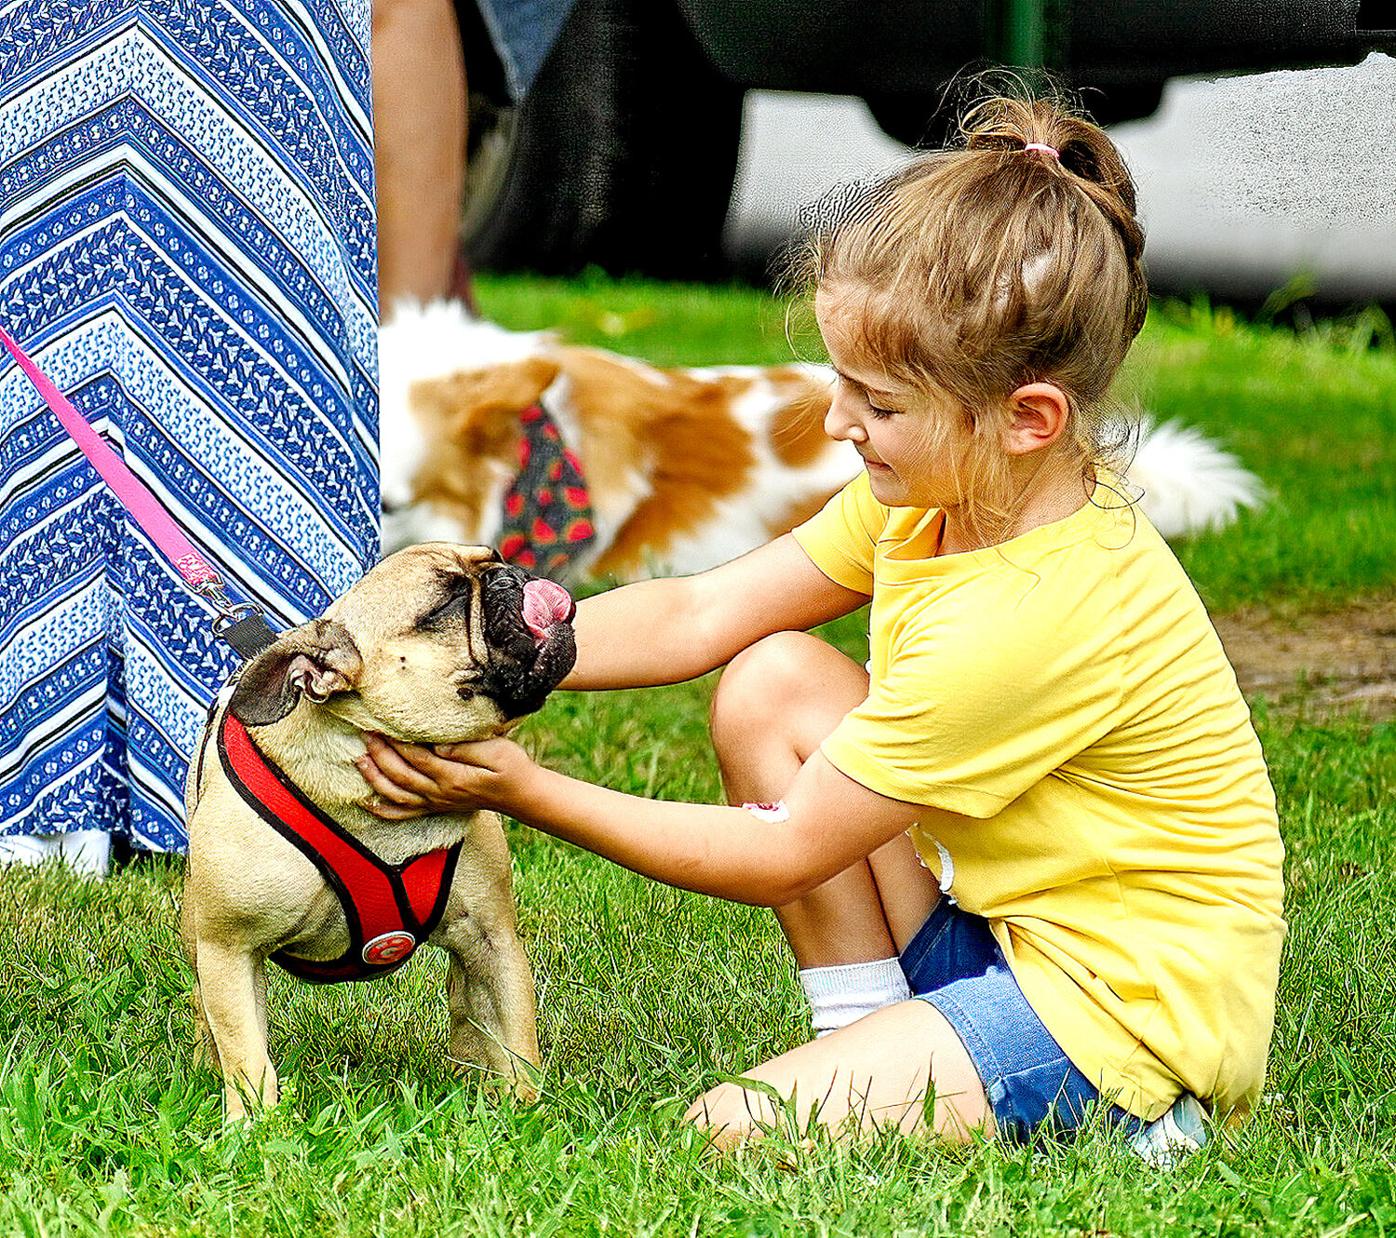 Scituate Rotary Club’s Farmer’s Market Pet Day